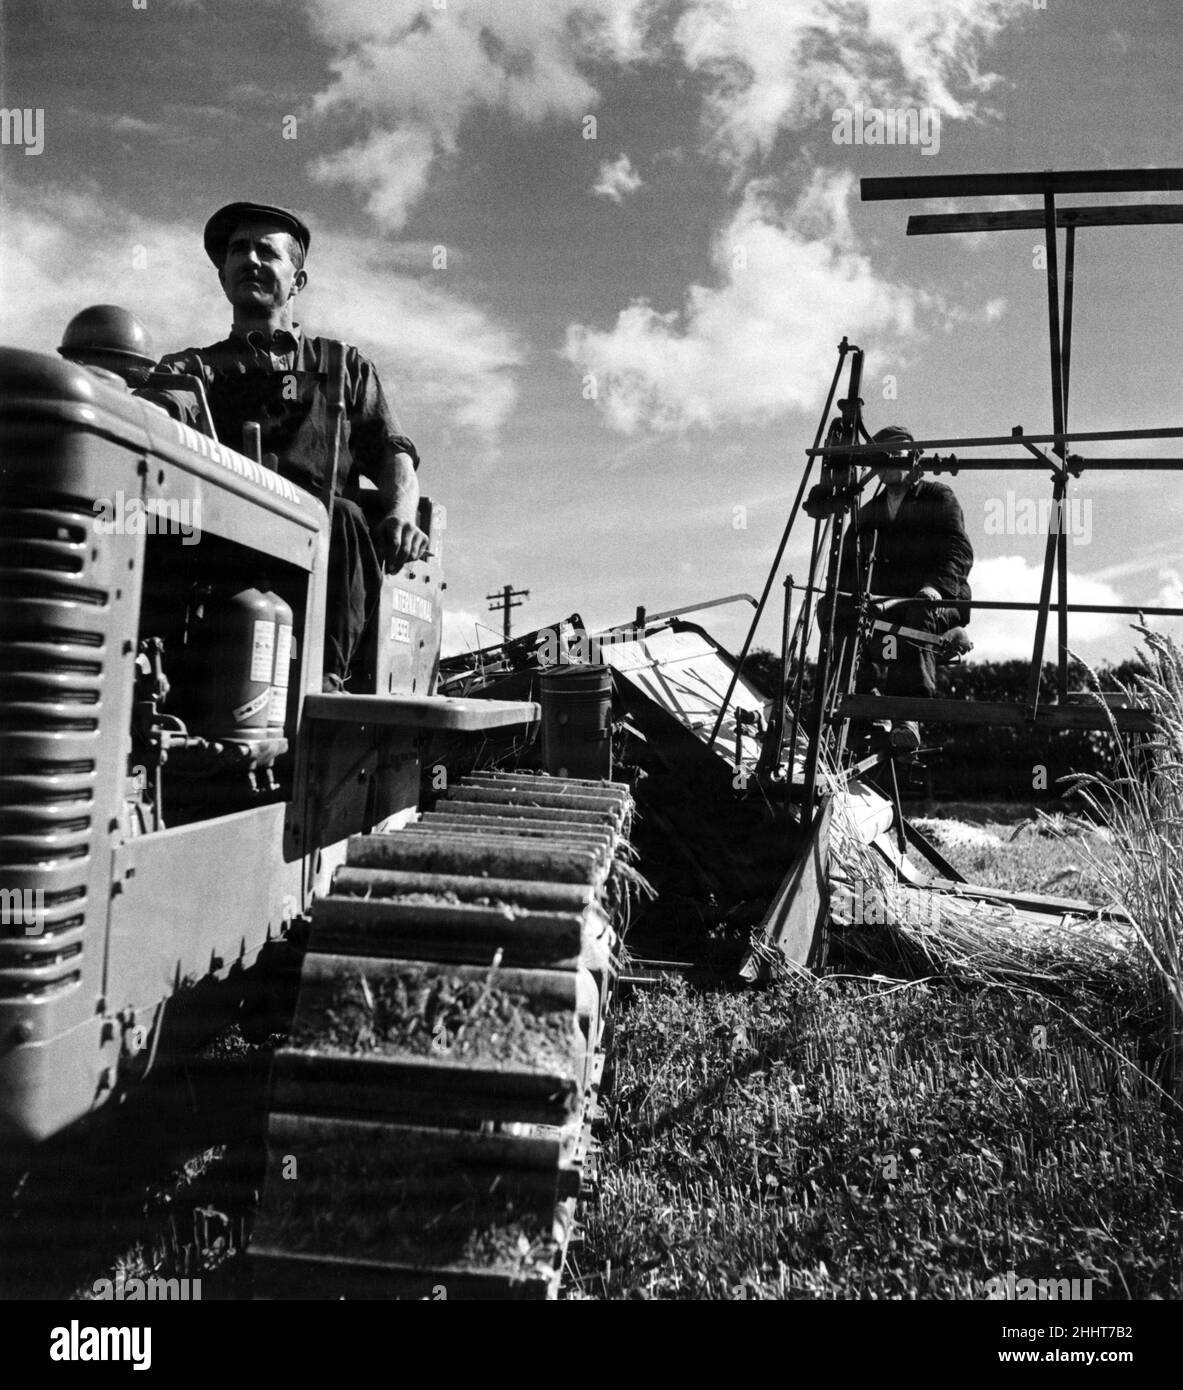 Harvesting near London. Mechanics is now part of the farm labourers job. Harvesting with a mechanical binder and tractor. Soon this will be superseded by the combined harvester as the binder and tractor superseded the horse and scythe. August 1945. Stock Photo